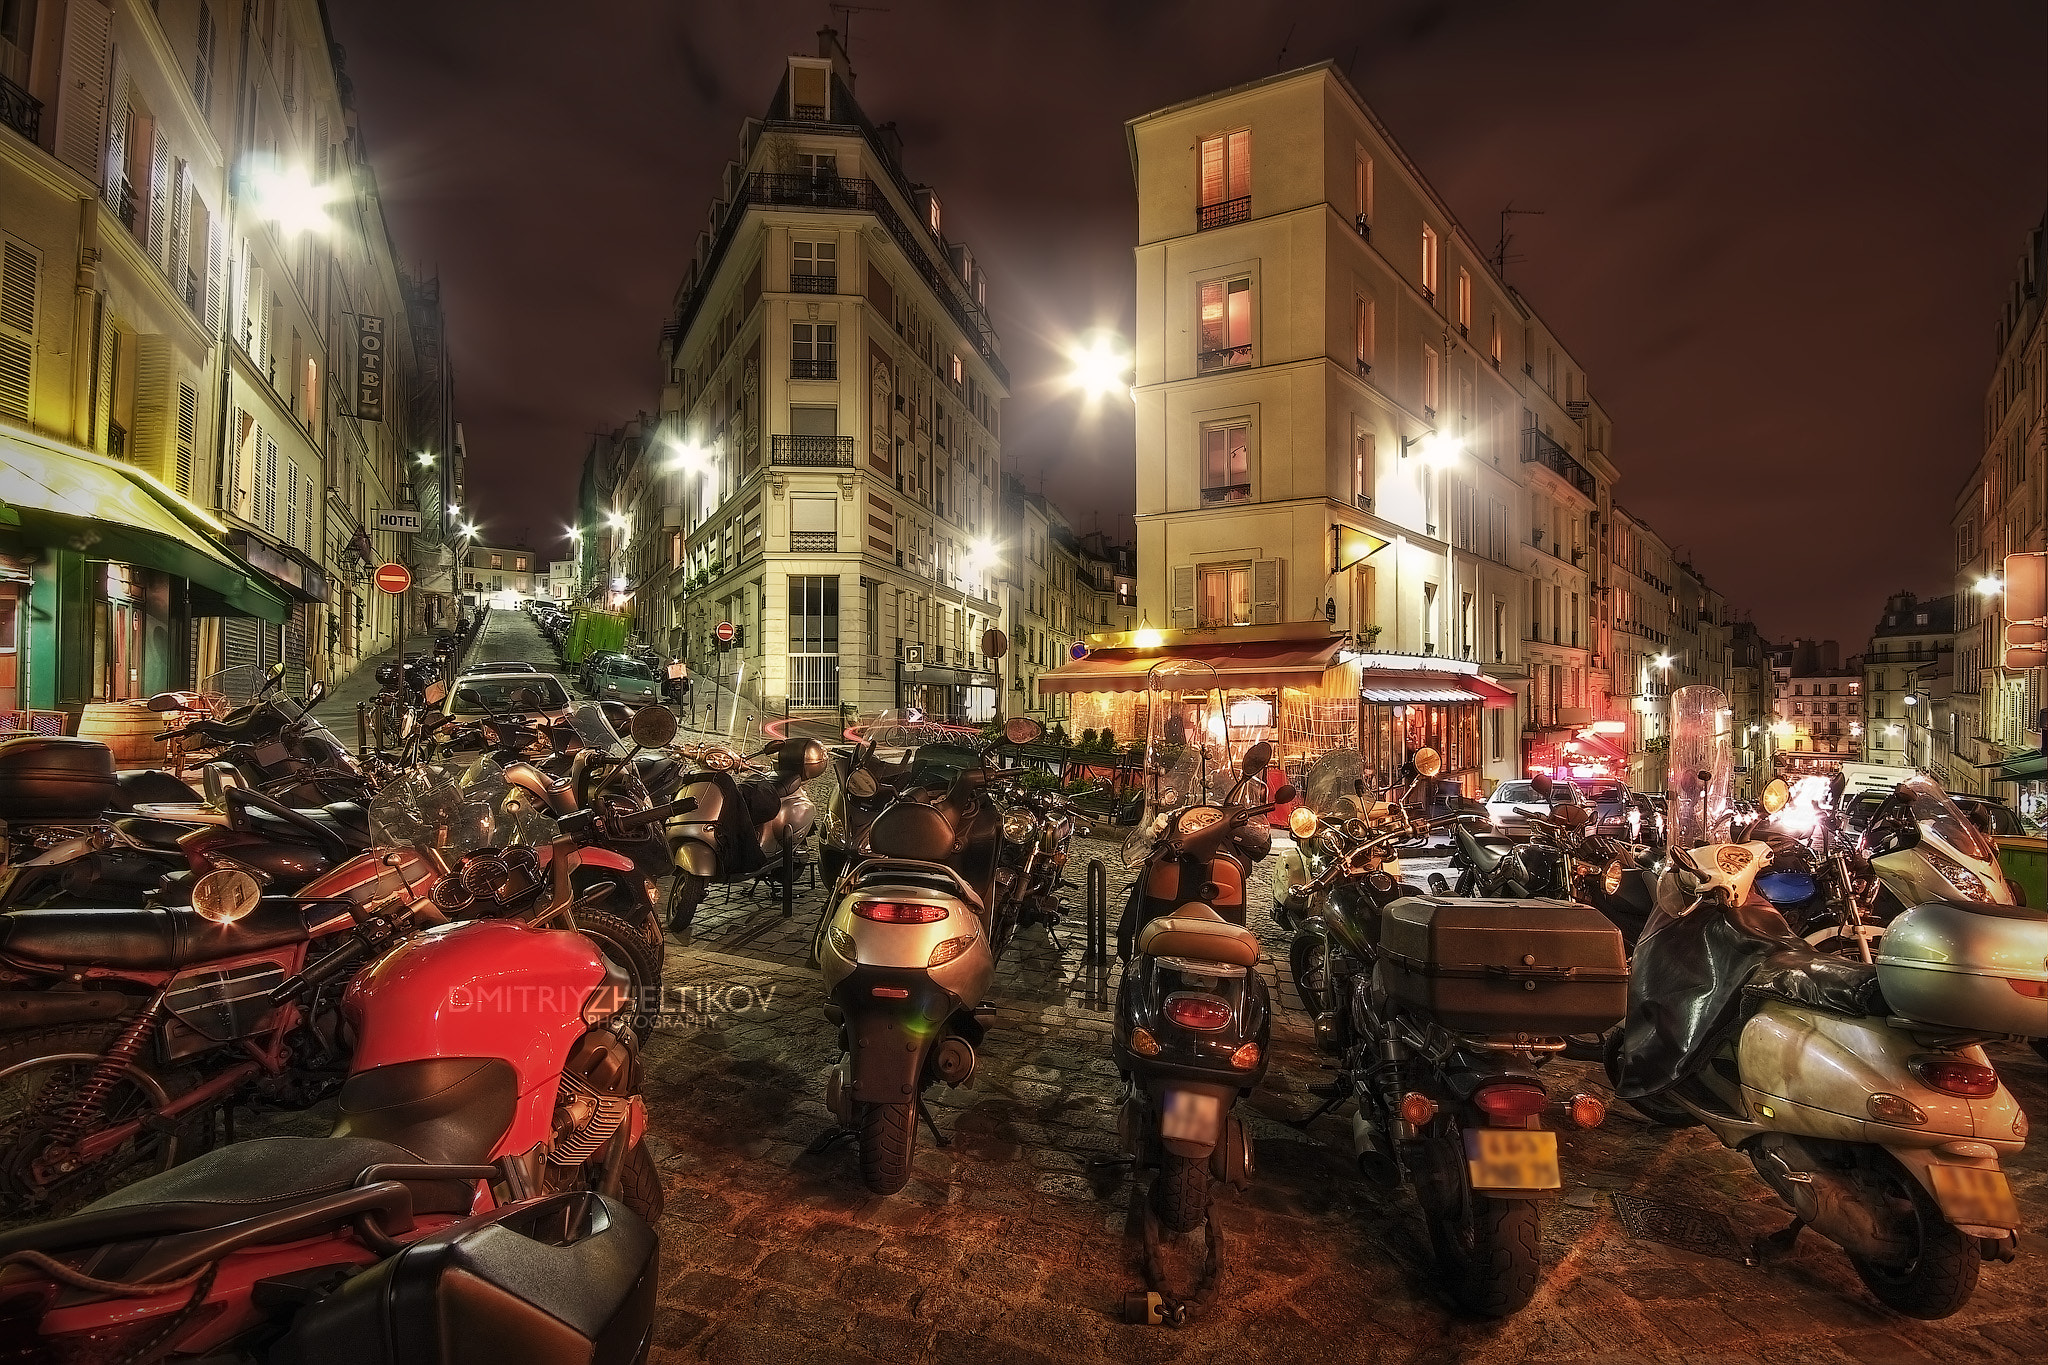 Canon EOS 40D sample photo. Parked motorcycles in the square on rue maurice utrillo at night photography